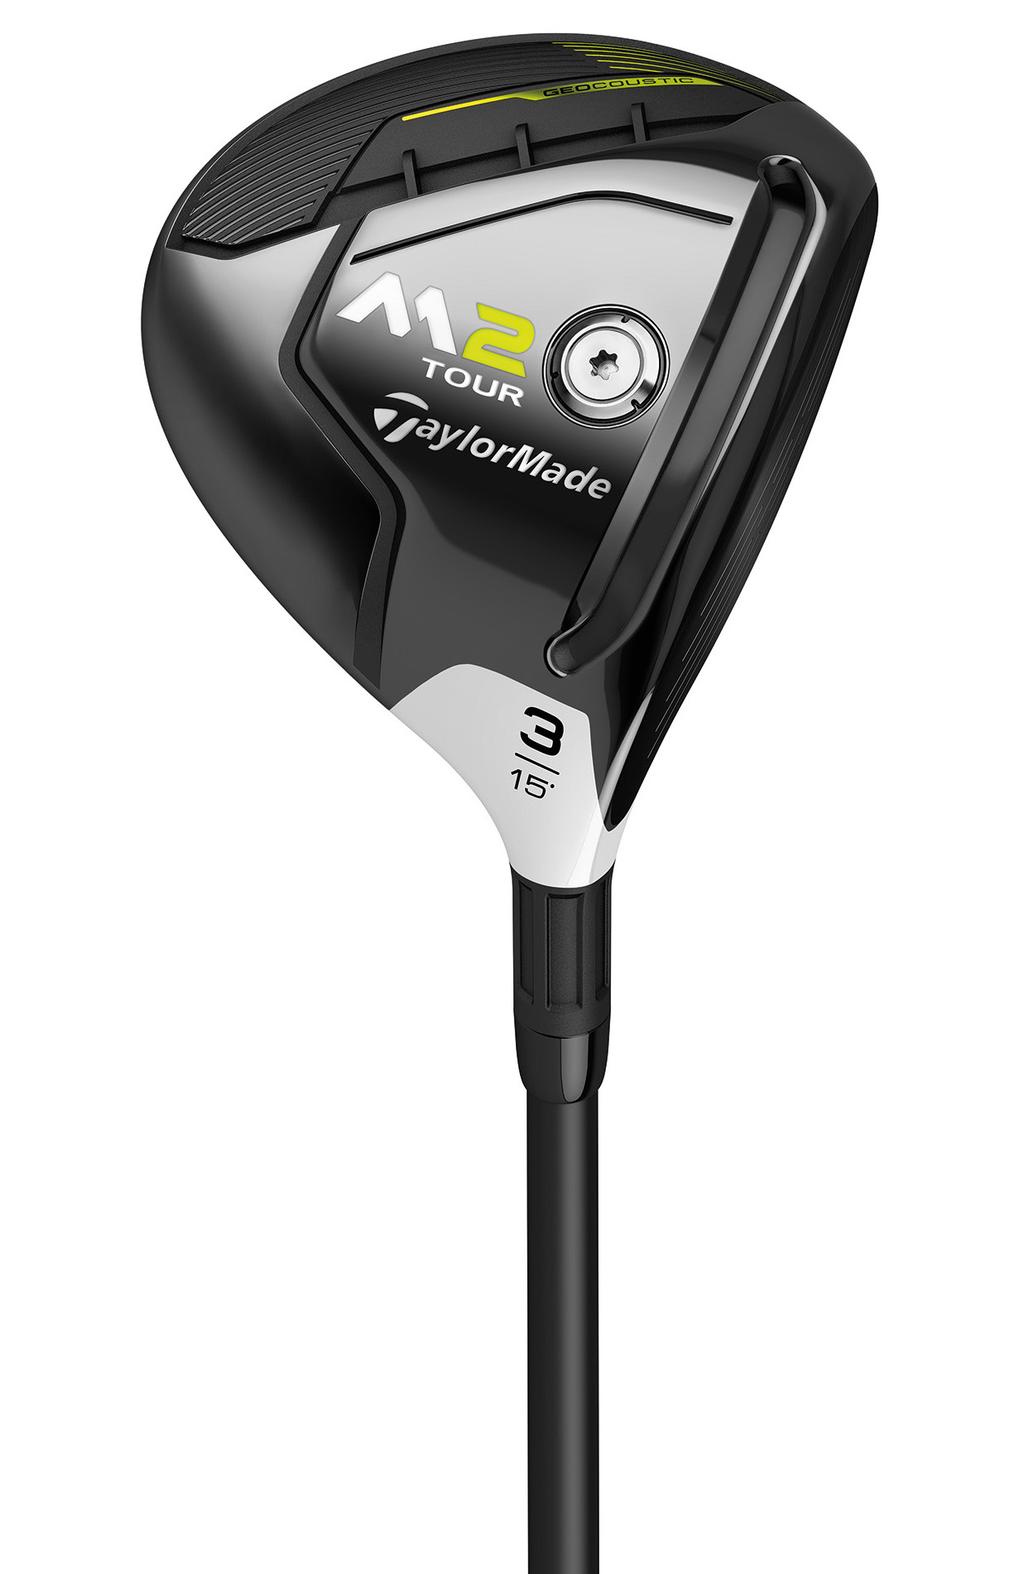 TOUR FAIRWAY M2 HORSEPOWER IN A COMPACT SHAPE Multi-material construction for low CG 6-layer carbon crown, 450 stainless steel body, and 455